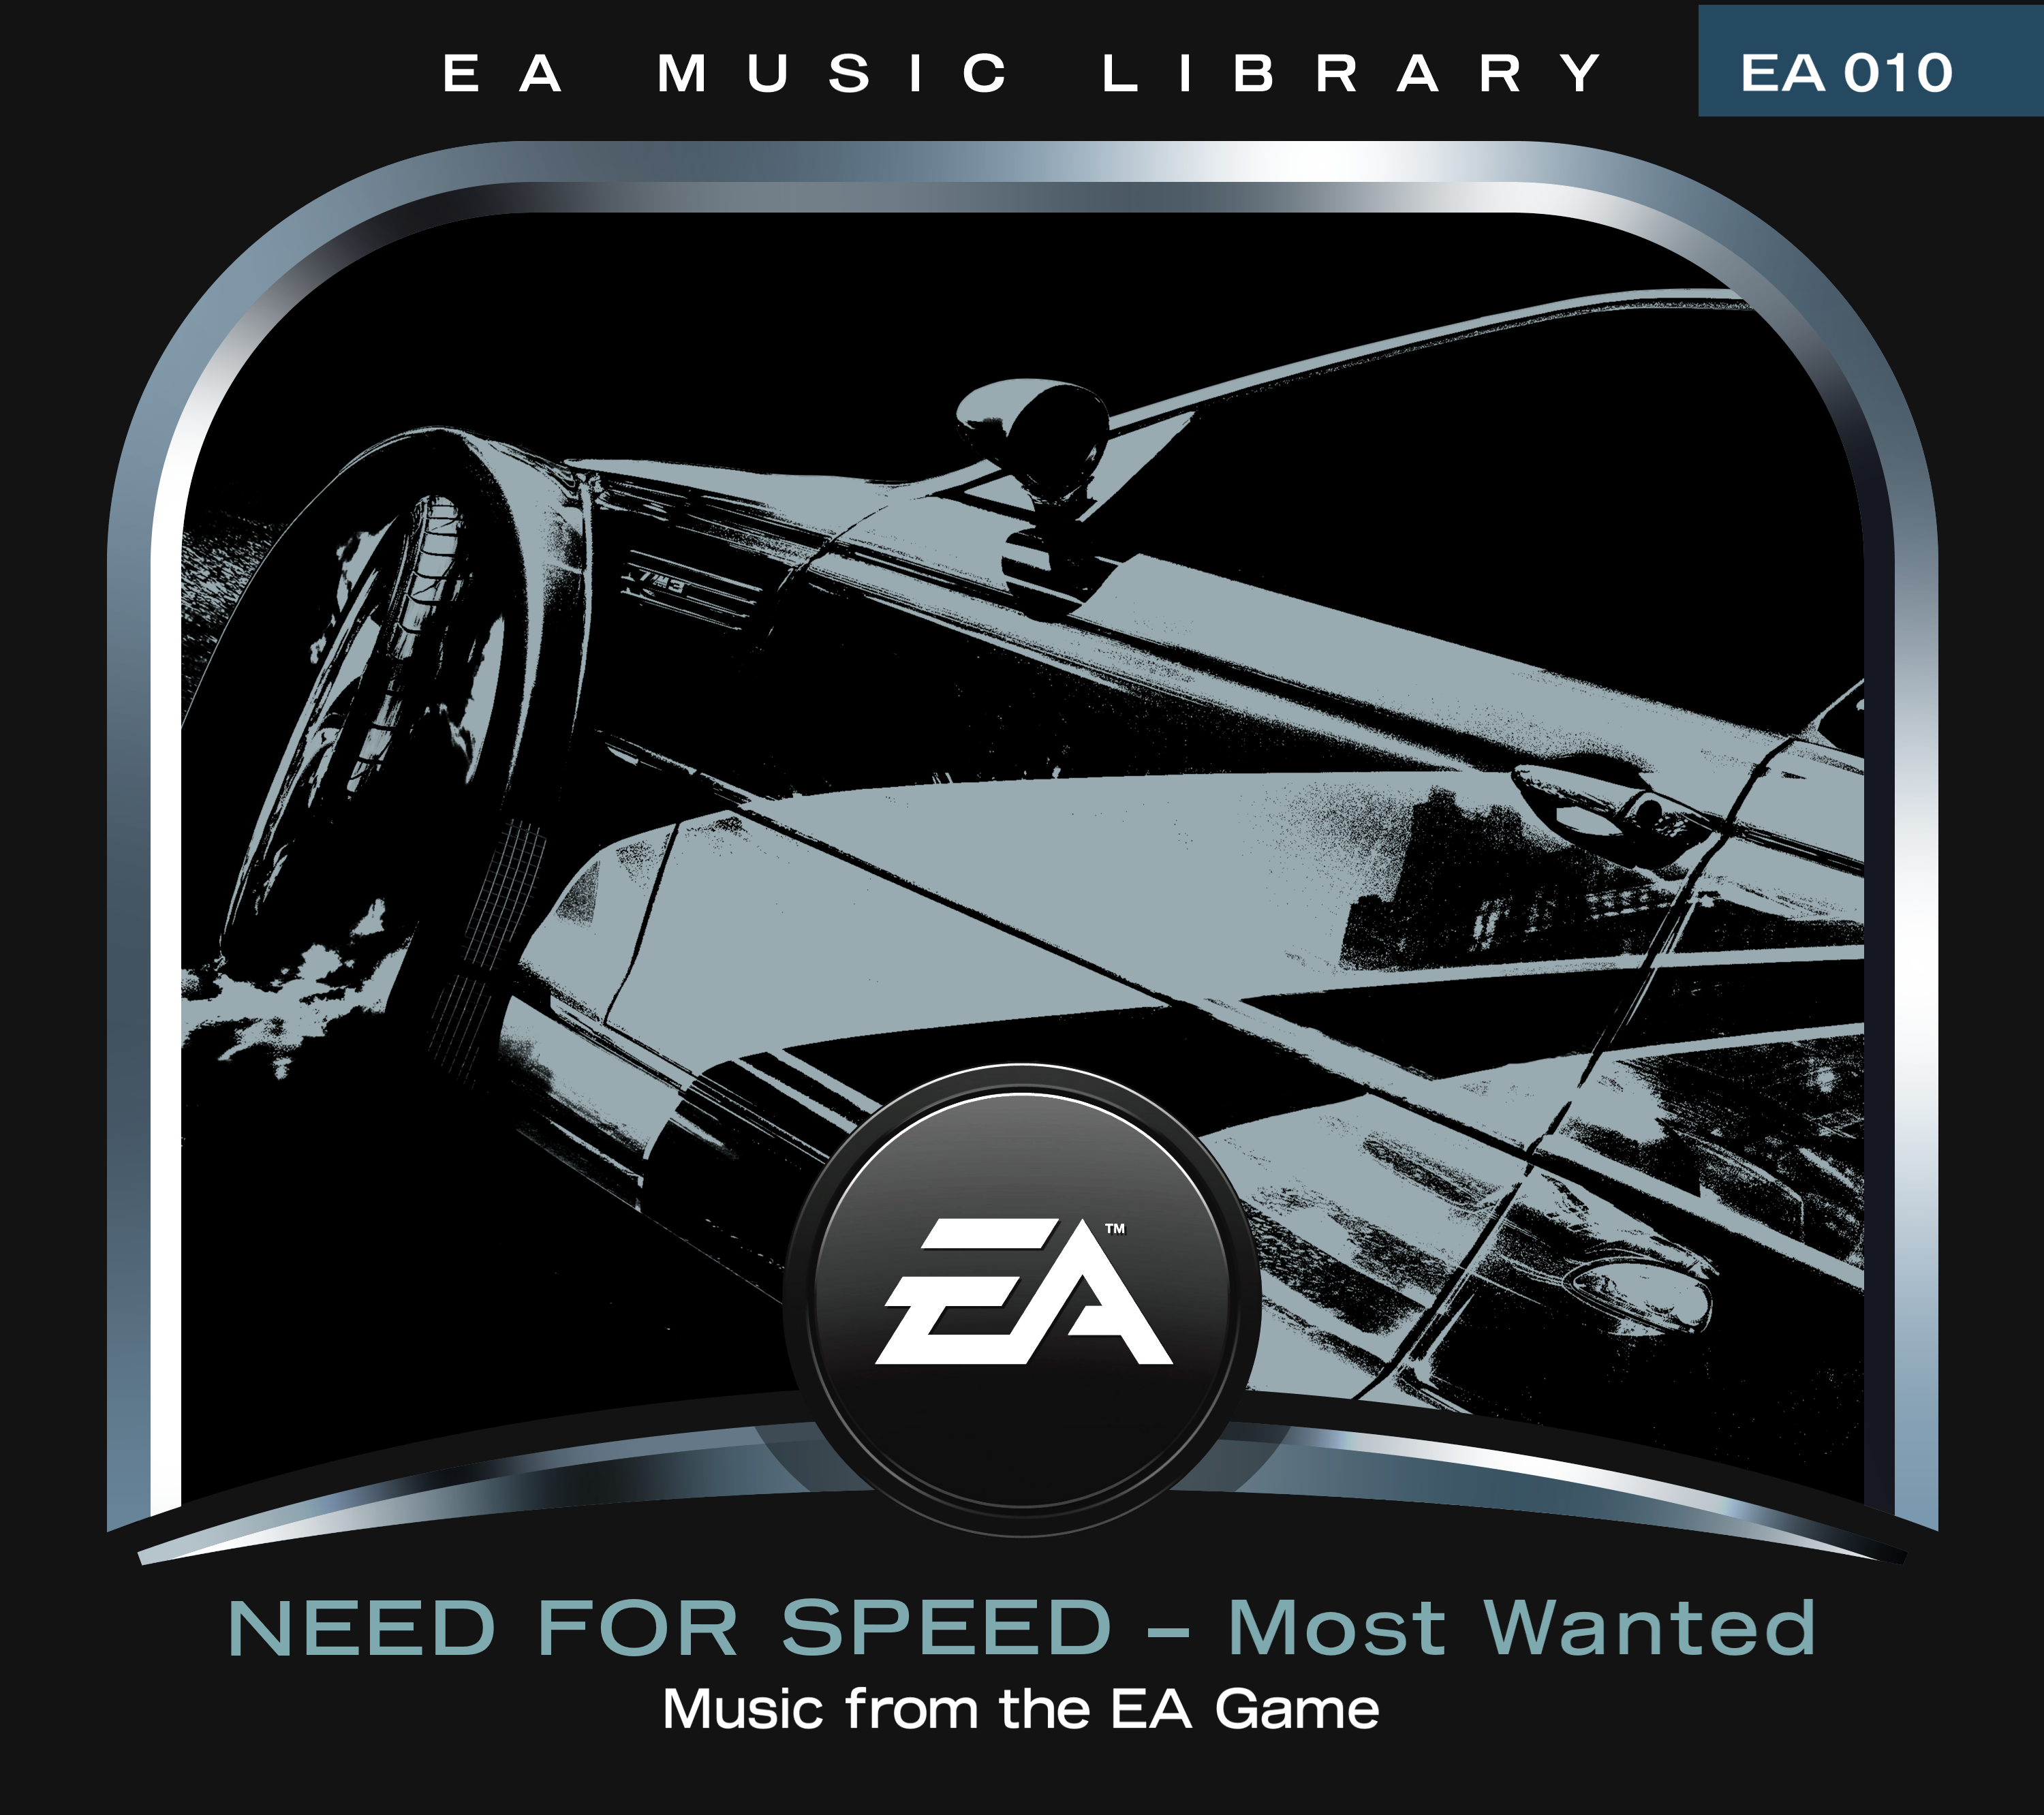 Need for Speed most wanted диск. NFS most wanted обложка. Need for Speed most wanted саундтреки. NFS MW OST. Need for speed most wanted песни